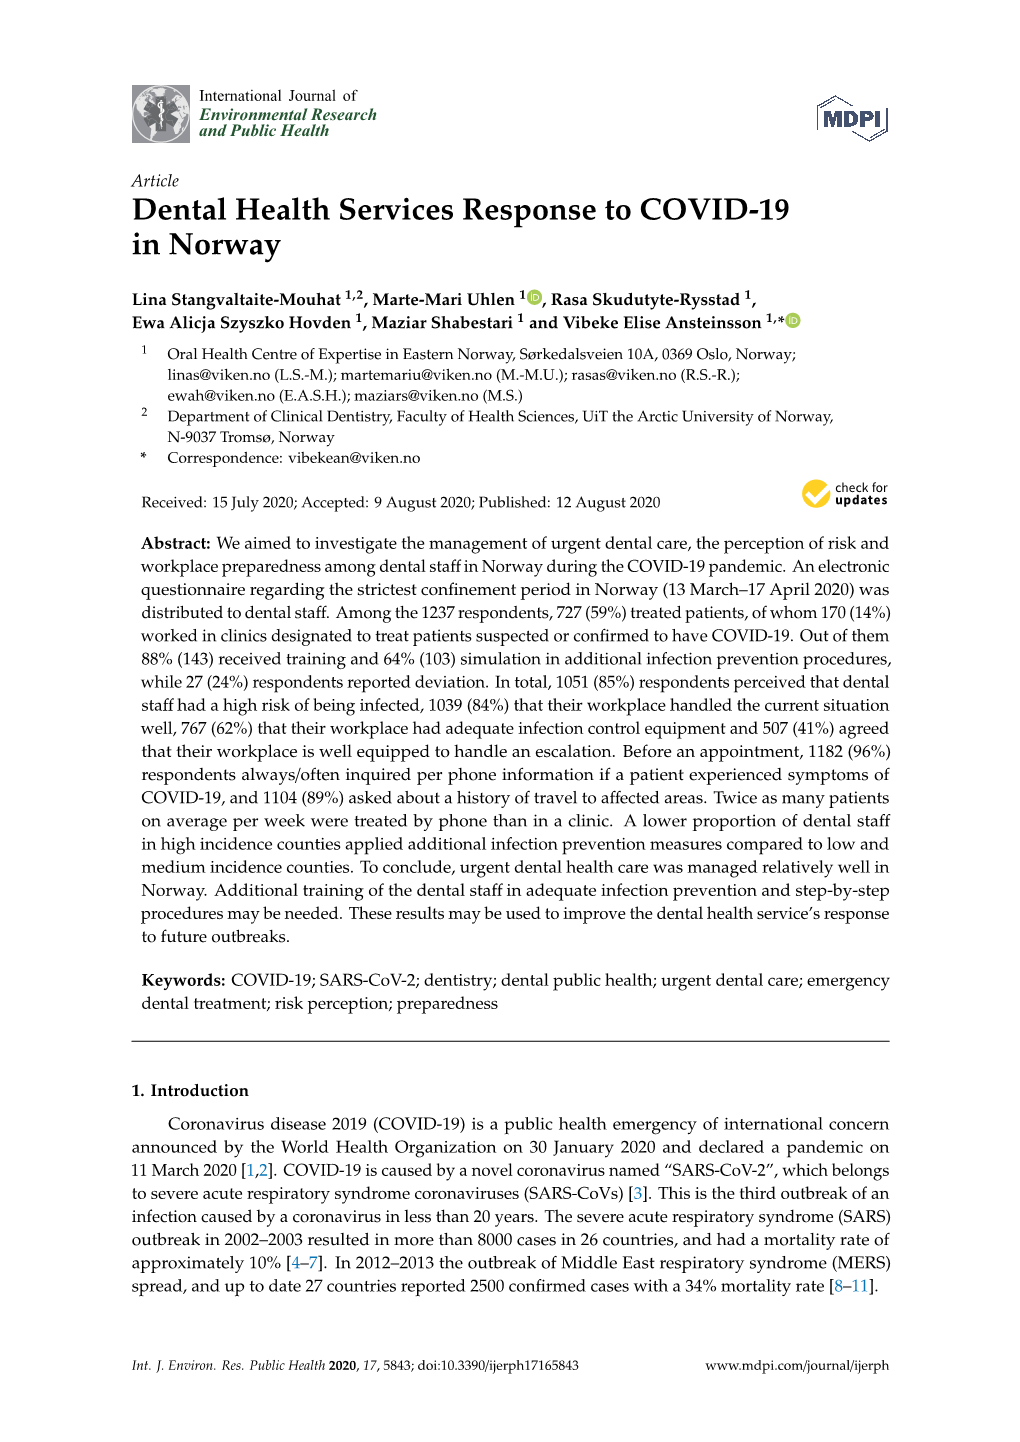 Dental Health Services Response to COVID-19 in Norway